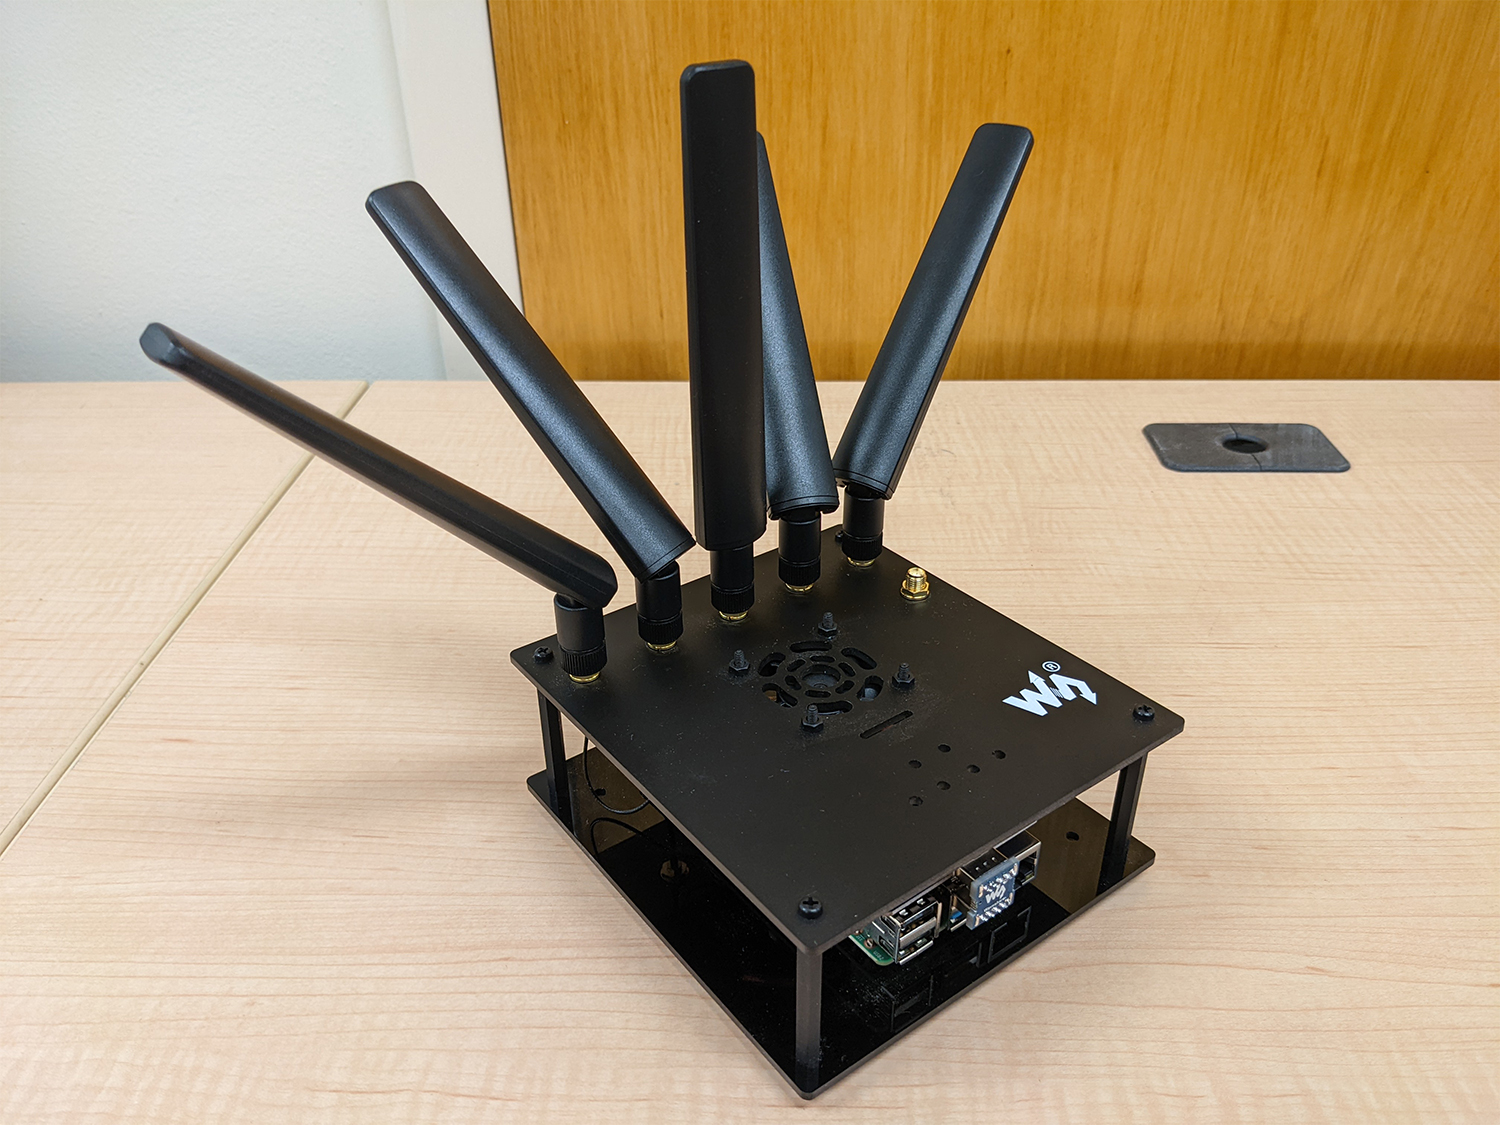 microcomputer with a 5G modem card and the antennas